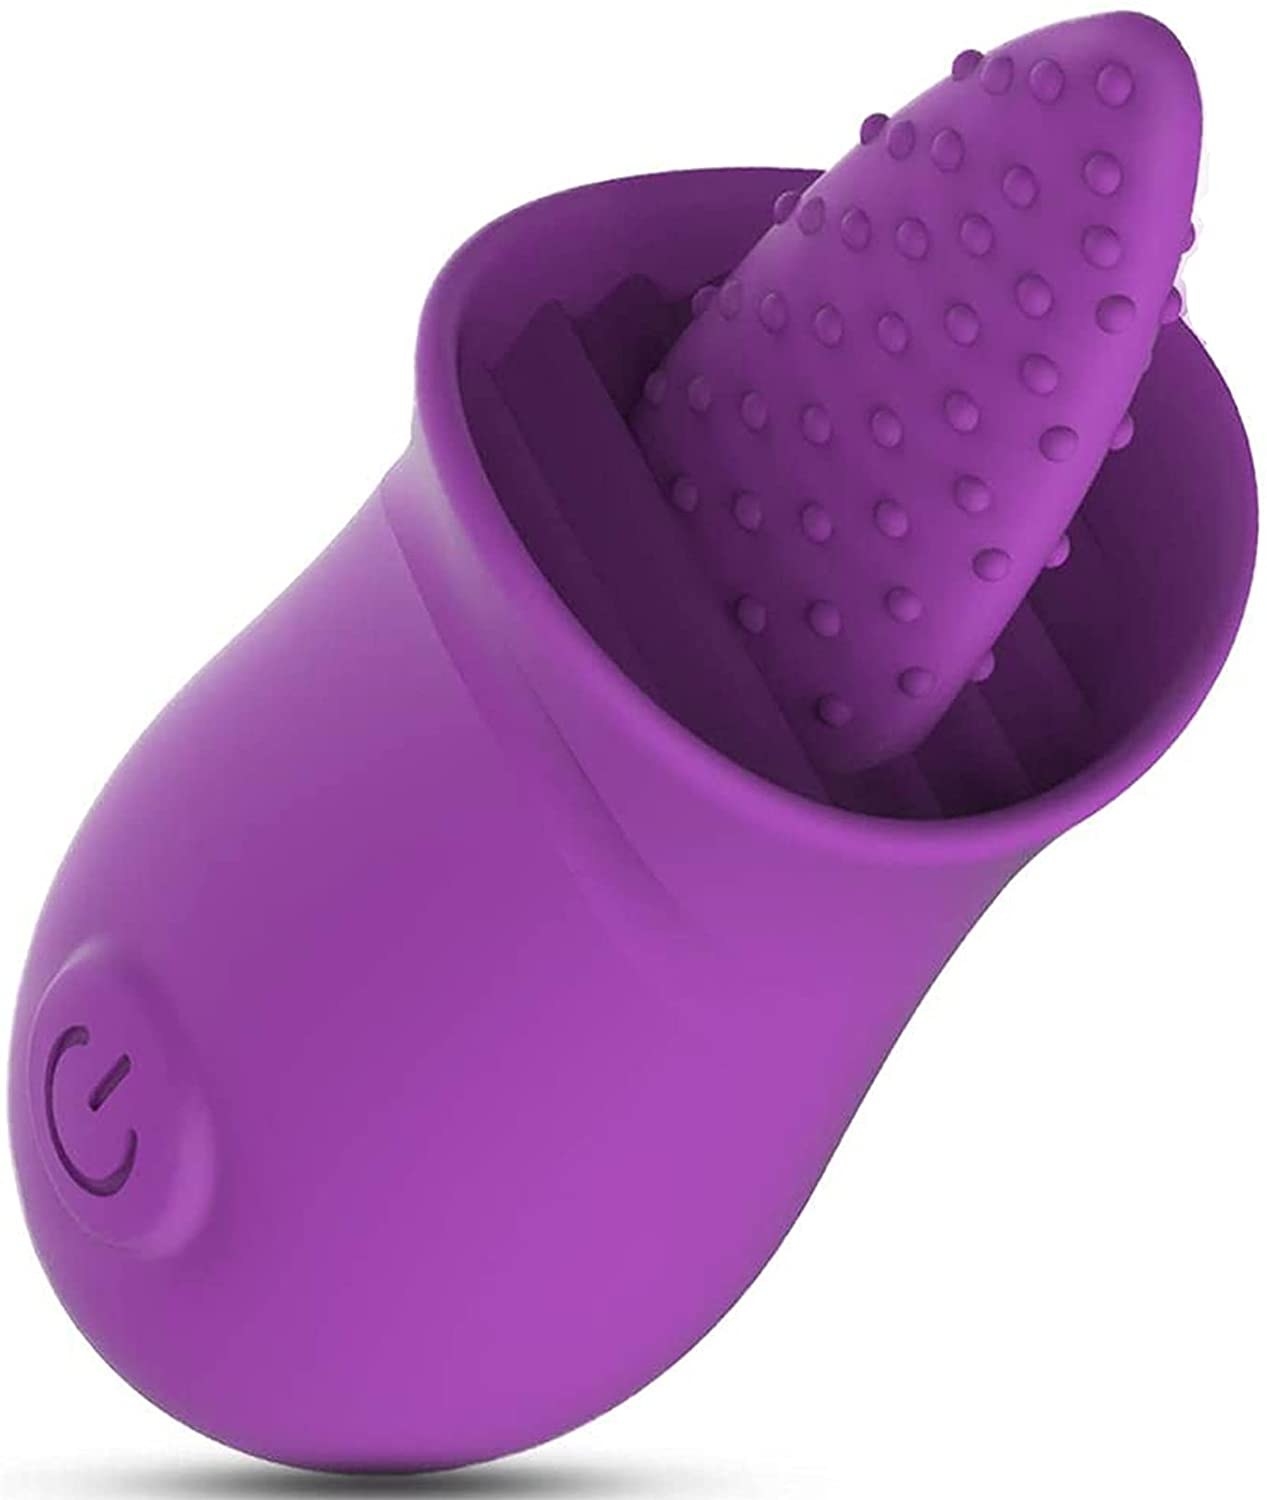 Vibrator no background erotic toy This Rose